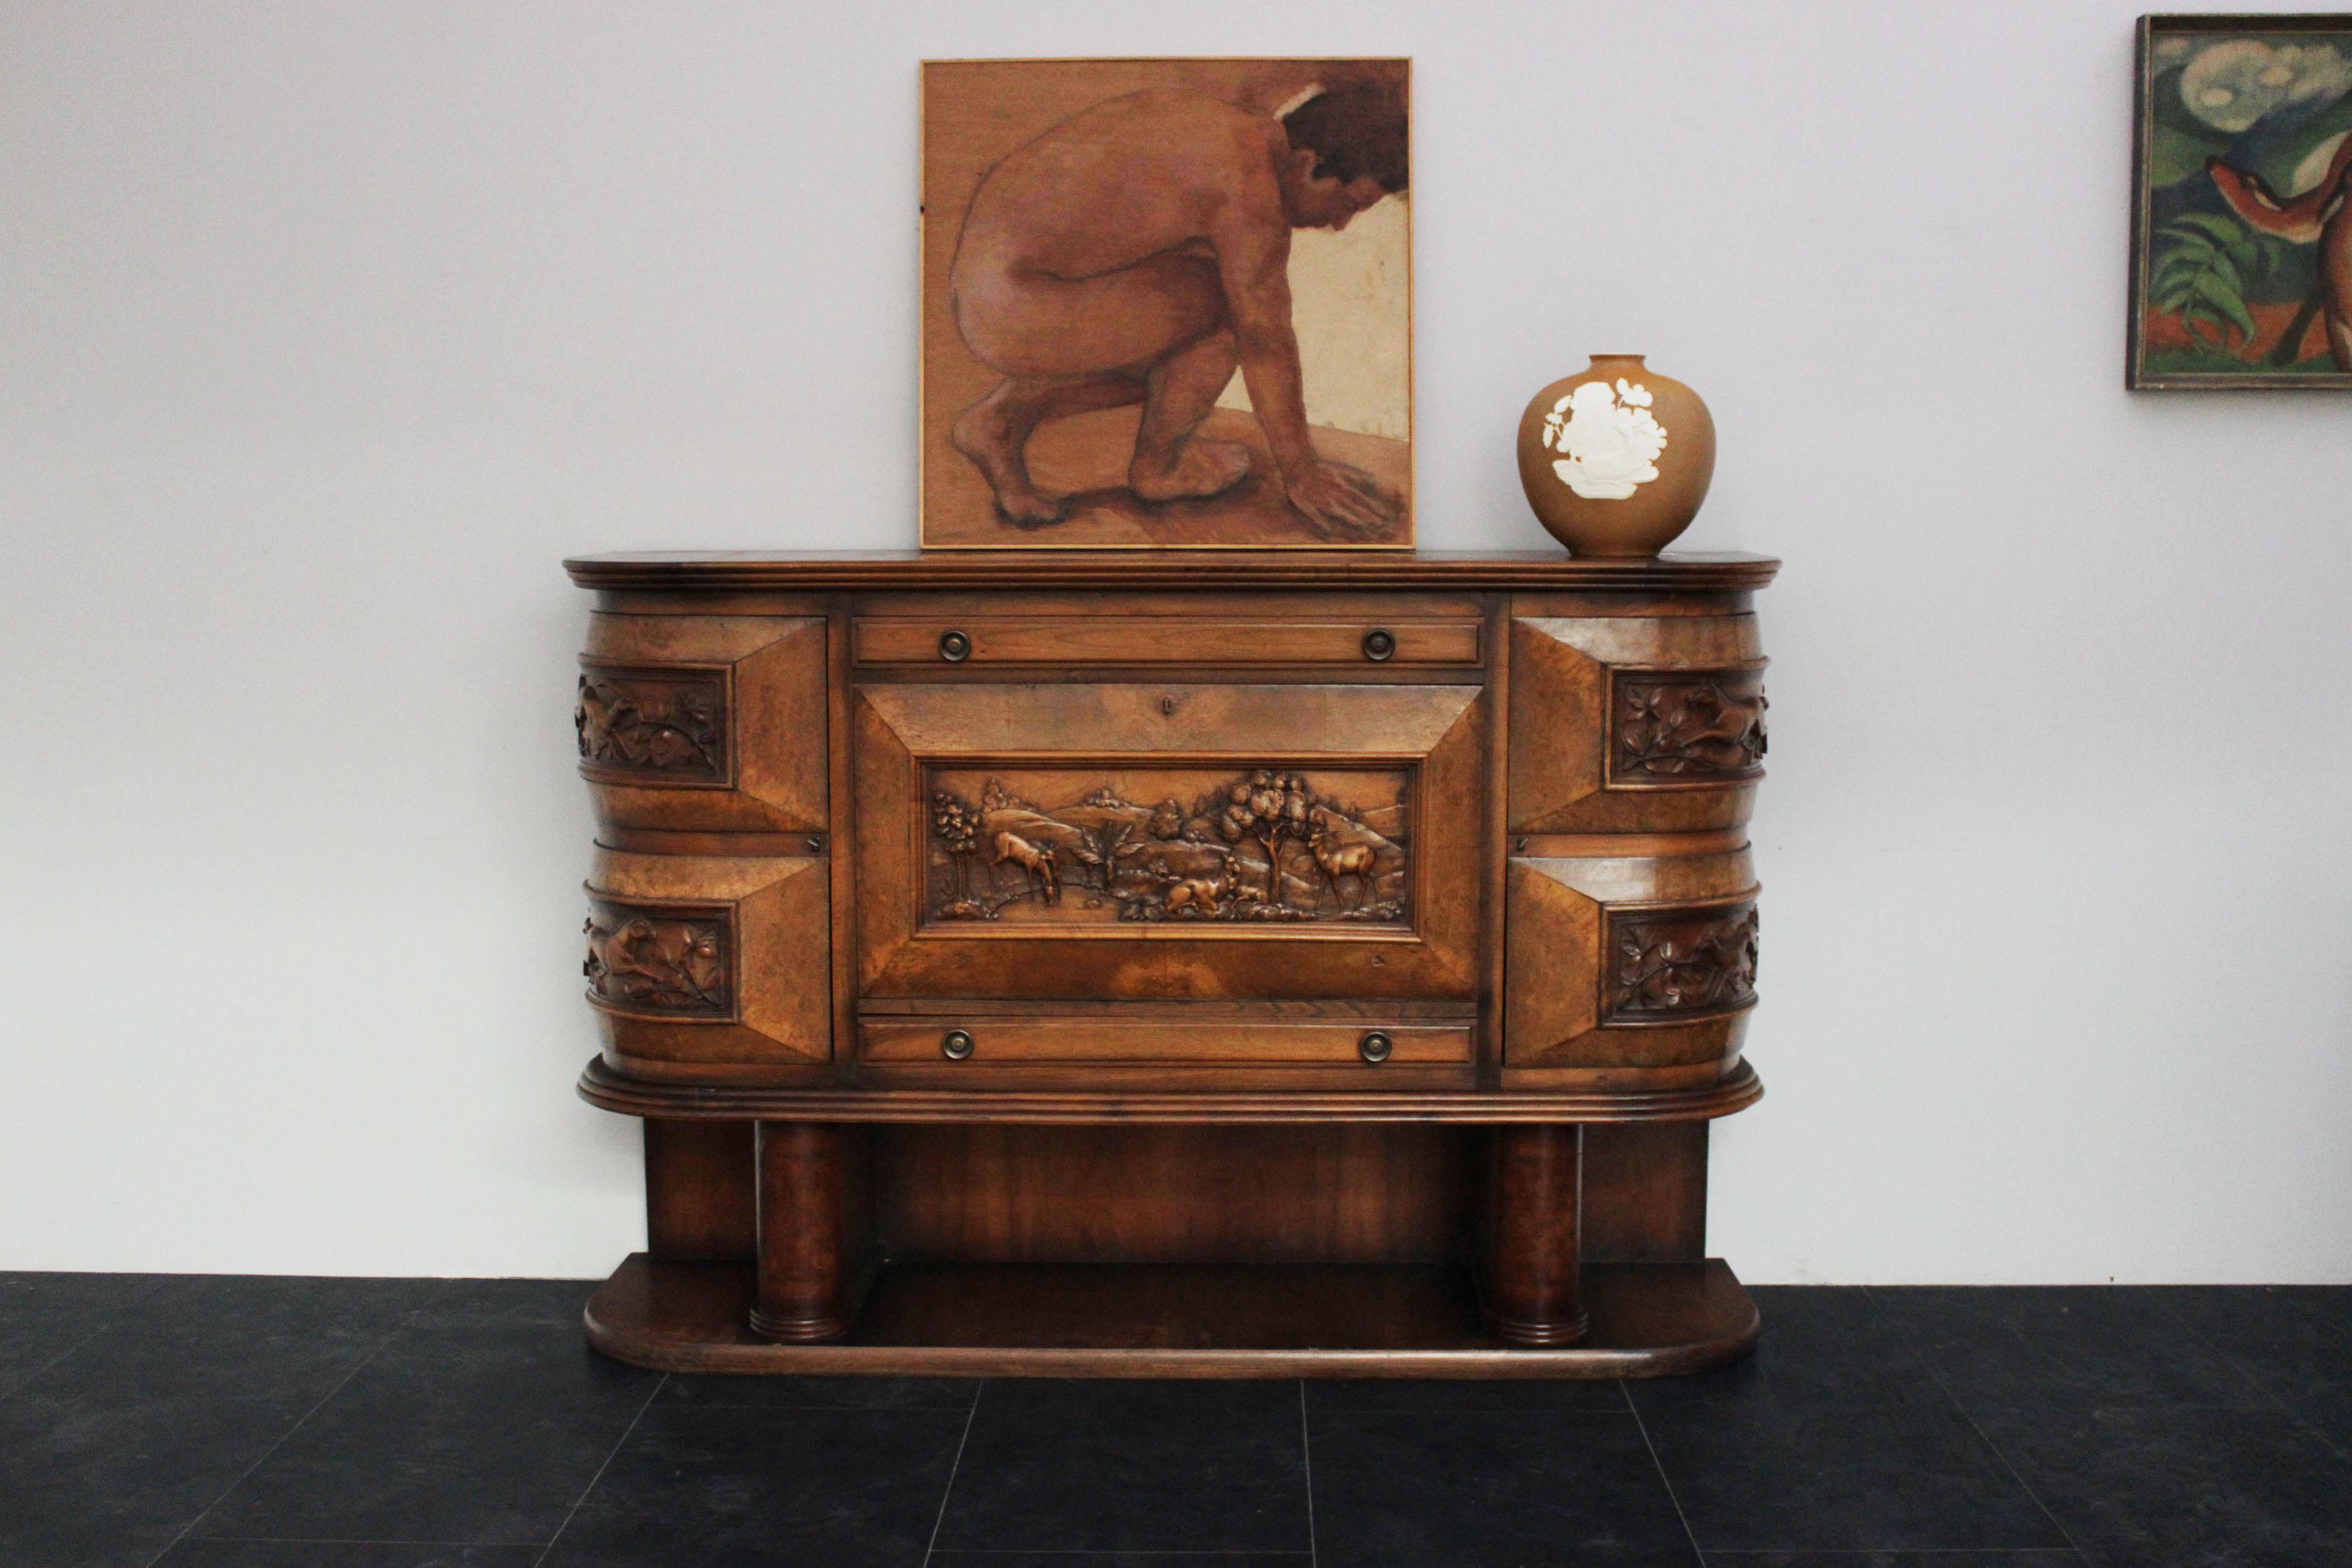 Hall furniture, elm and briarwood, finely carved with the theme of animals and forest . Exquisite combination of interior and exterior elm wood and elm briar. The style and themes of the carvings lead back to the style of Pierluigi Colli.